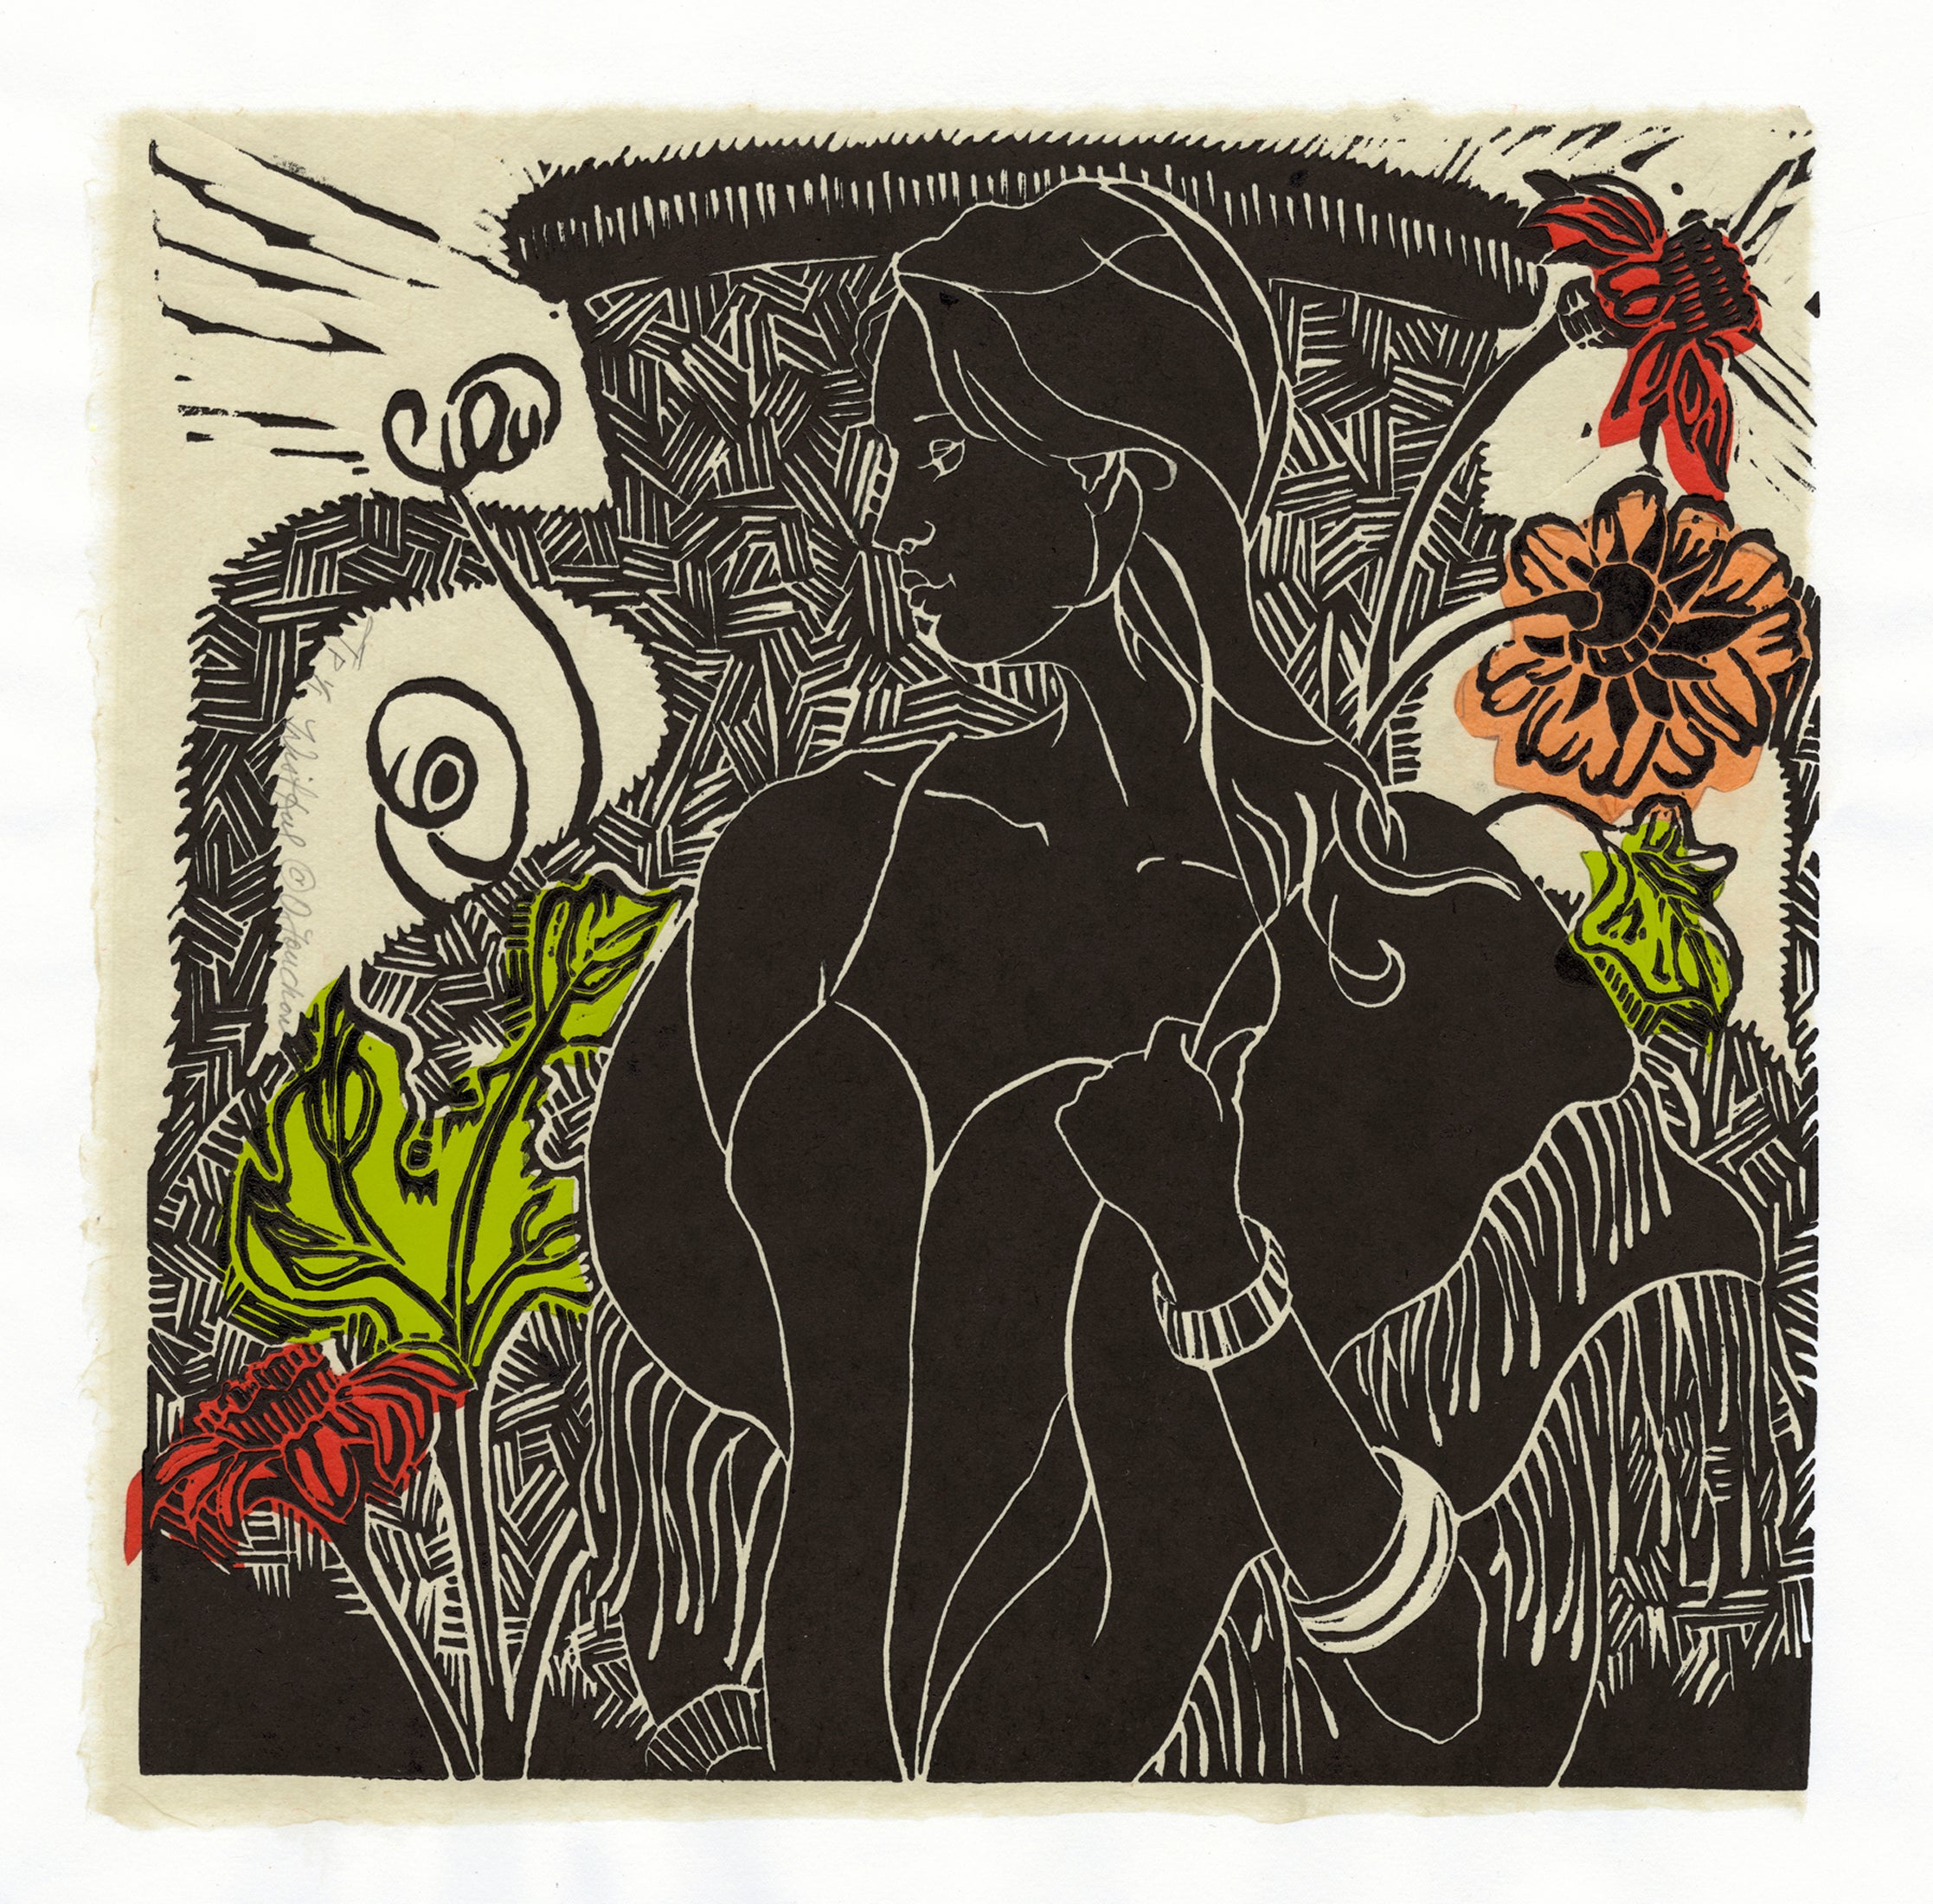 Wistful, linocut with chine colle for sale by Ouida Touchon, square size 12x12 image size.